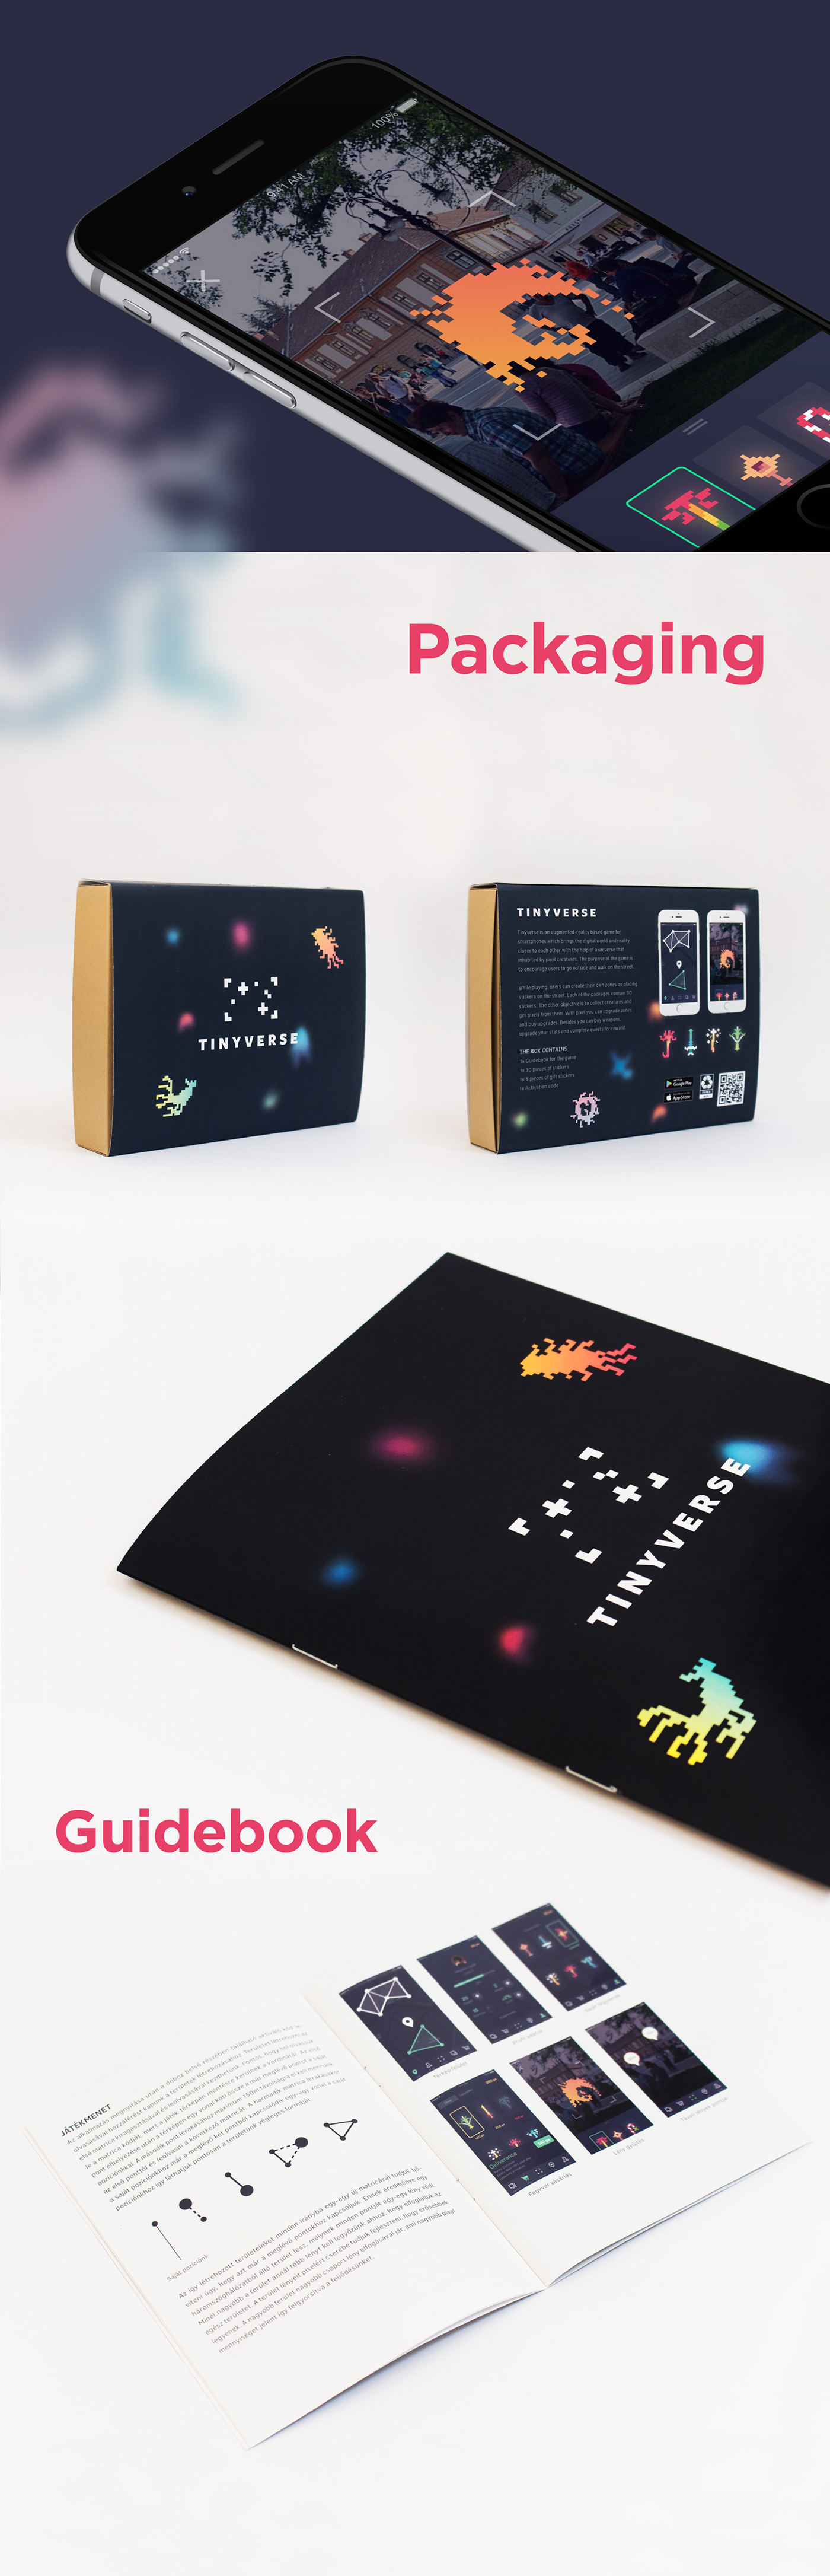 UI ux pixel creatures mobile app application Packaging augmented reality game design 